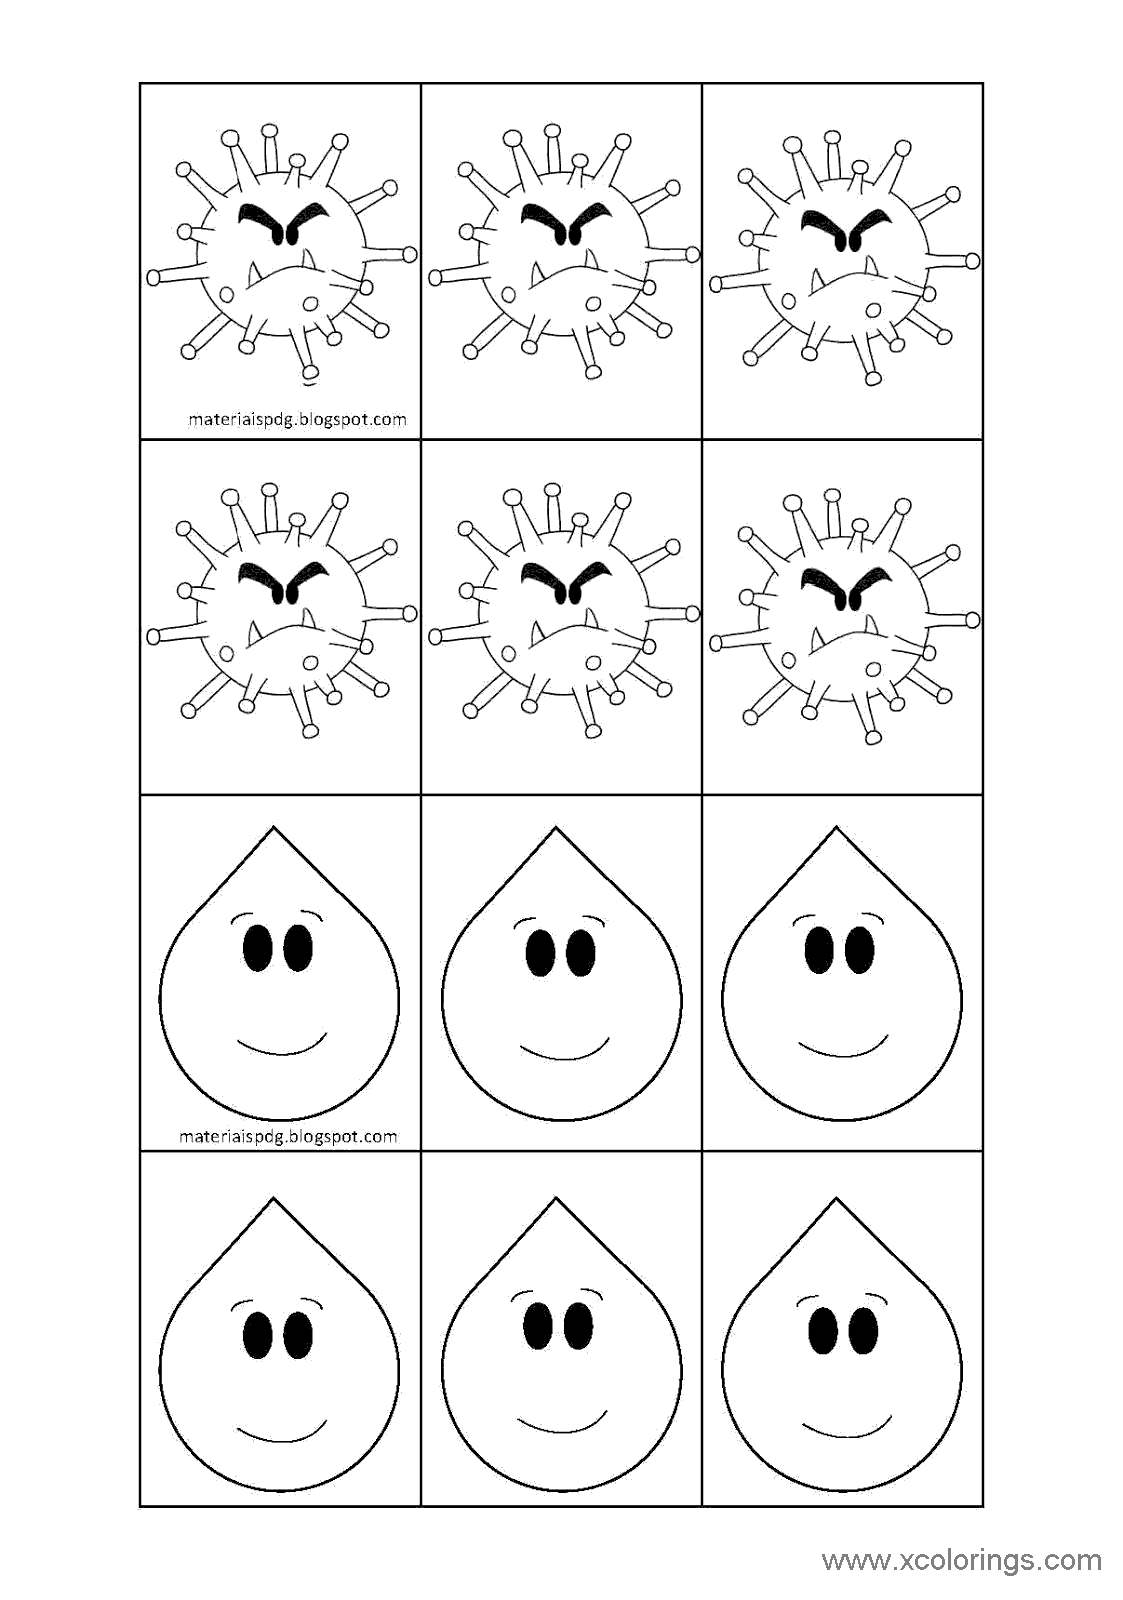 Free Simple Covid-19 Coloring Pages printable